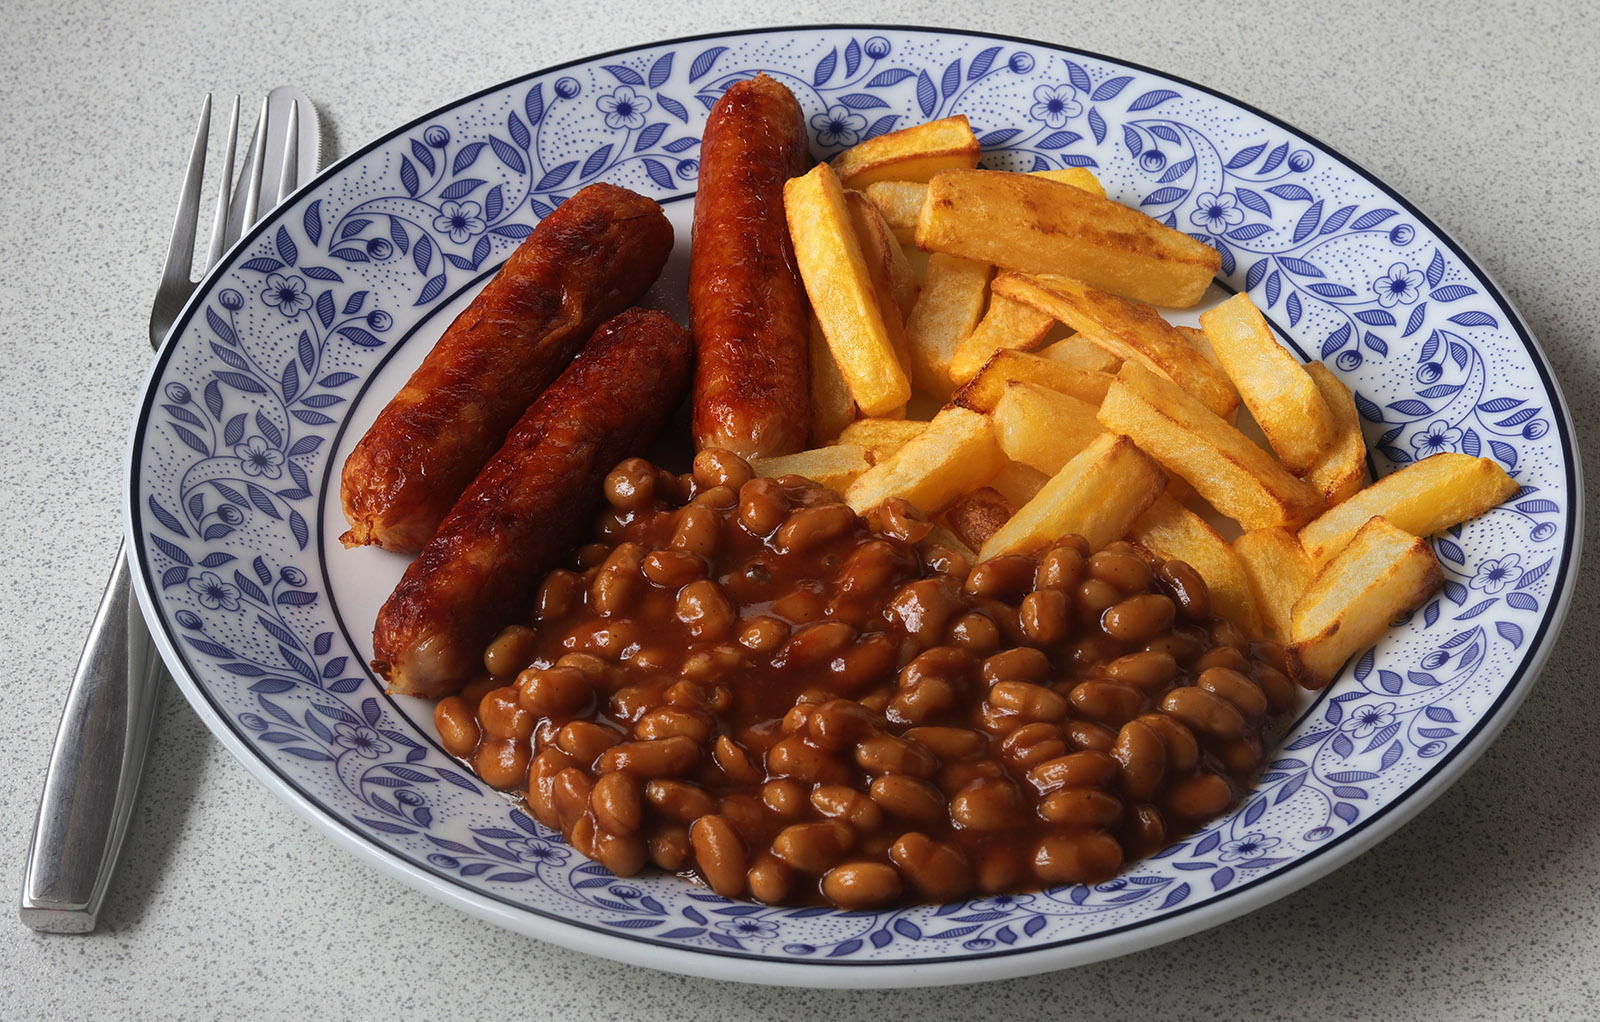 Sausage, beans and chips s.jpg